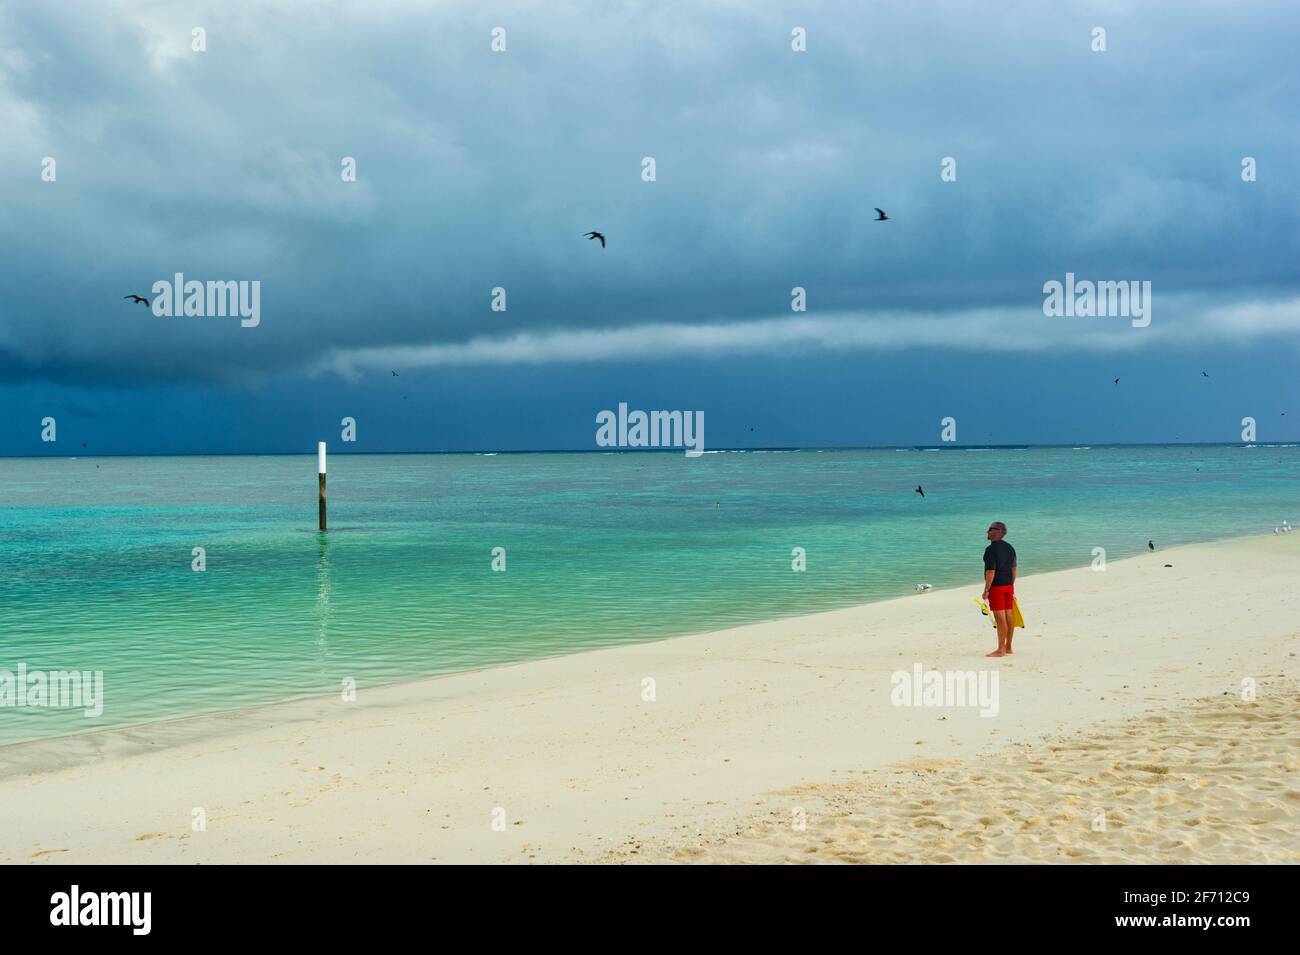 Tourist standing on the beach watching stormy skies over the Coral Sea at Heron Island, Southern Great Barrier Reef, Queensland, QLD, Australia Stock Photo